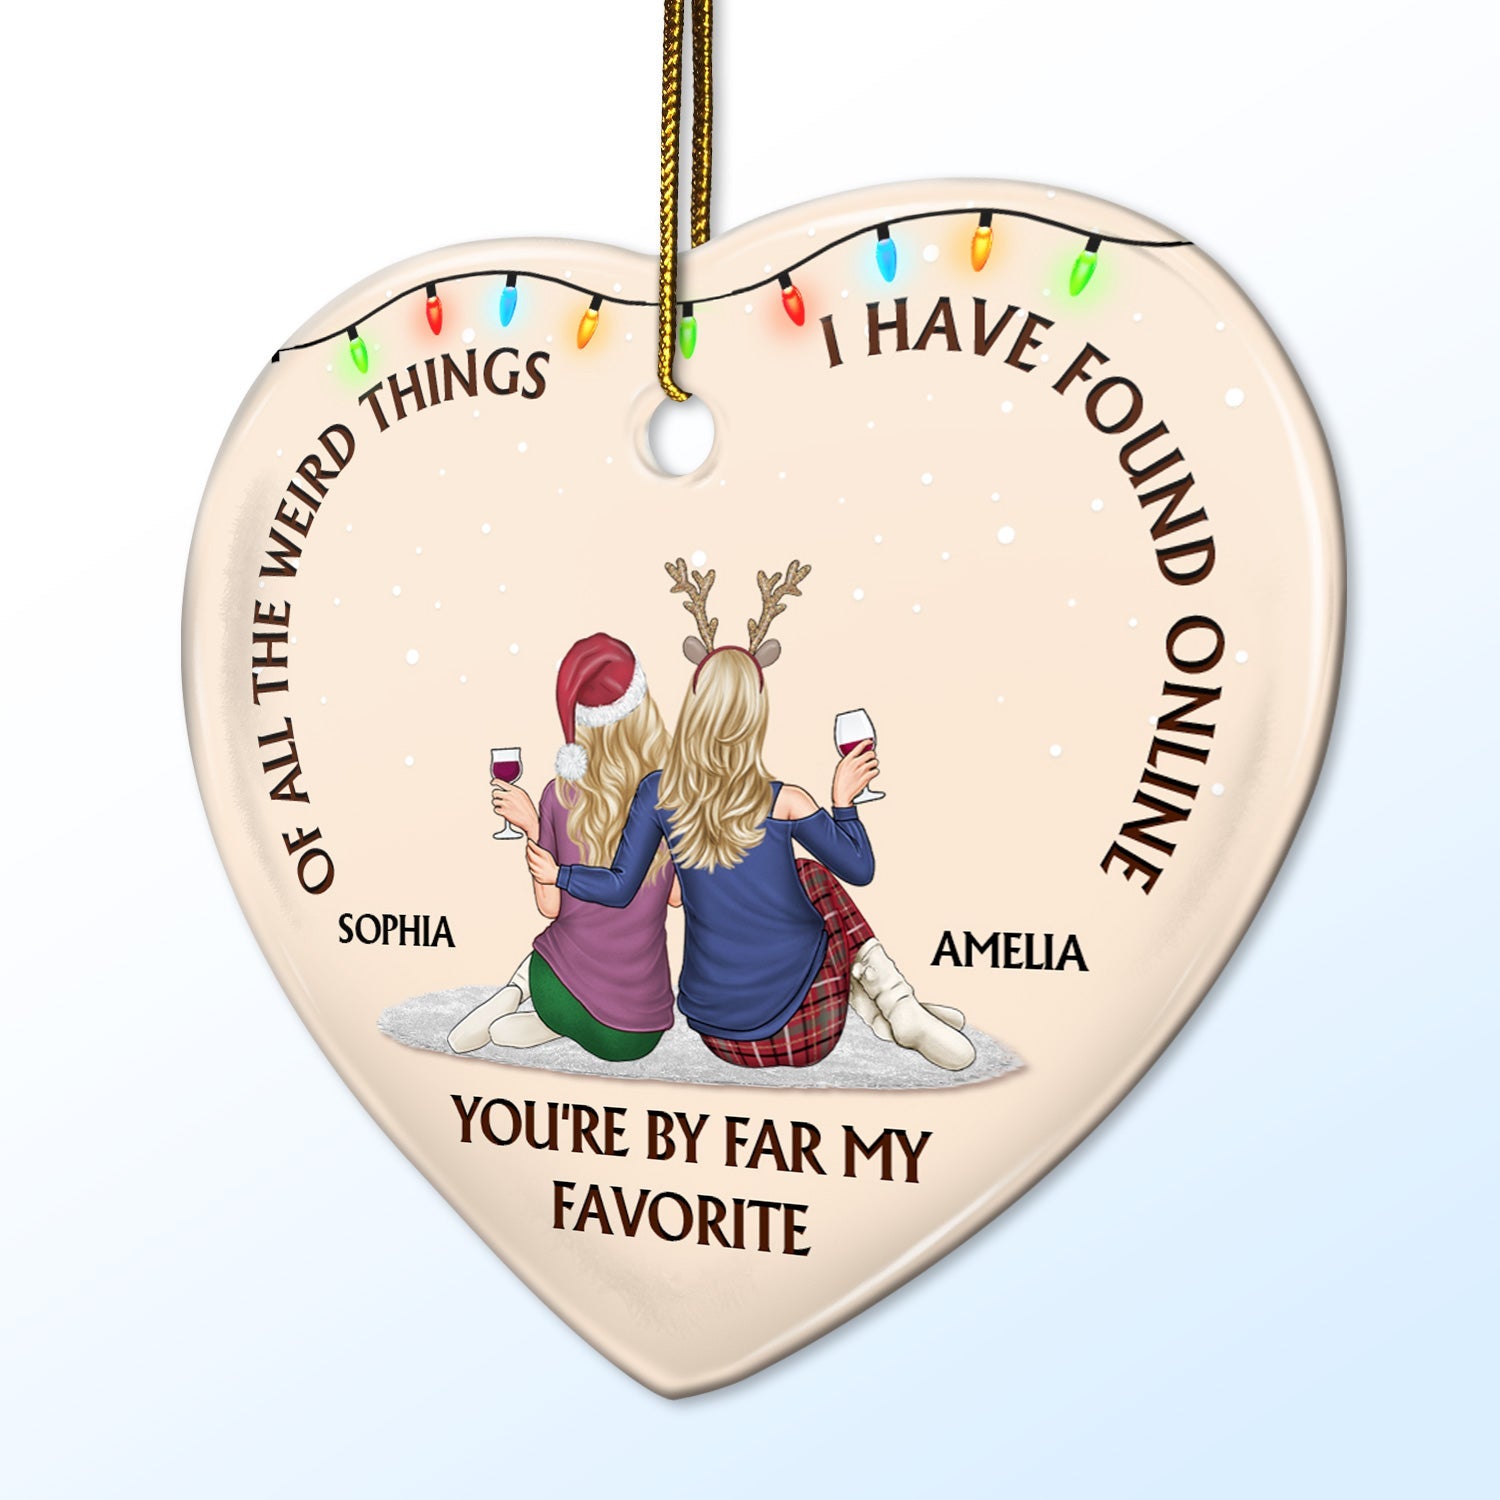 Of All The Weird Things - Christmas Gift For Couples, Husband, Wife - Personalized Heart Ceramic Ornament